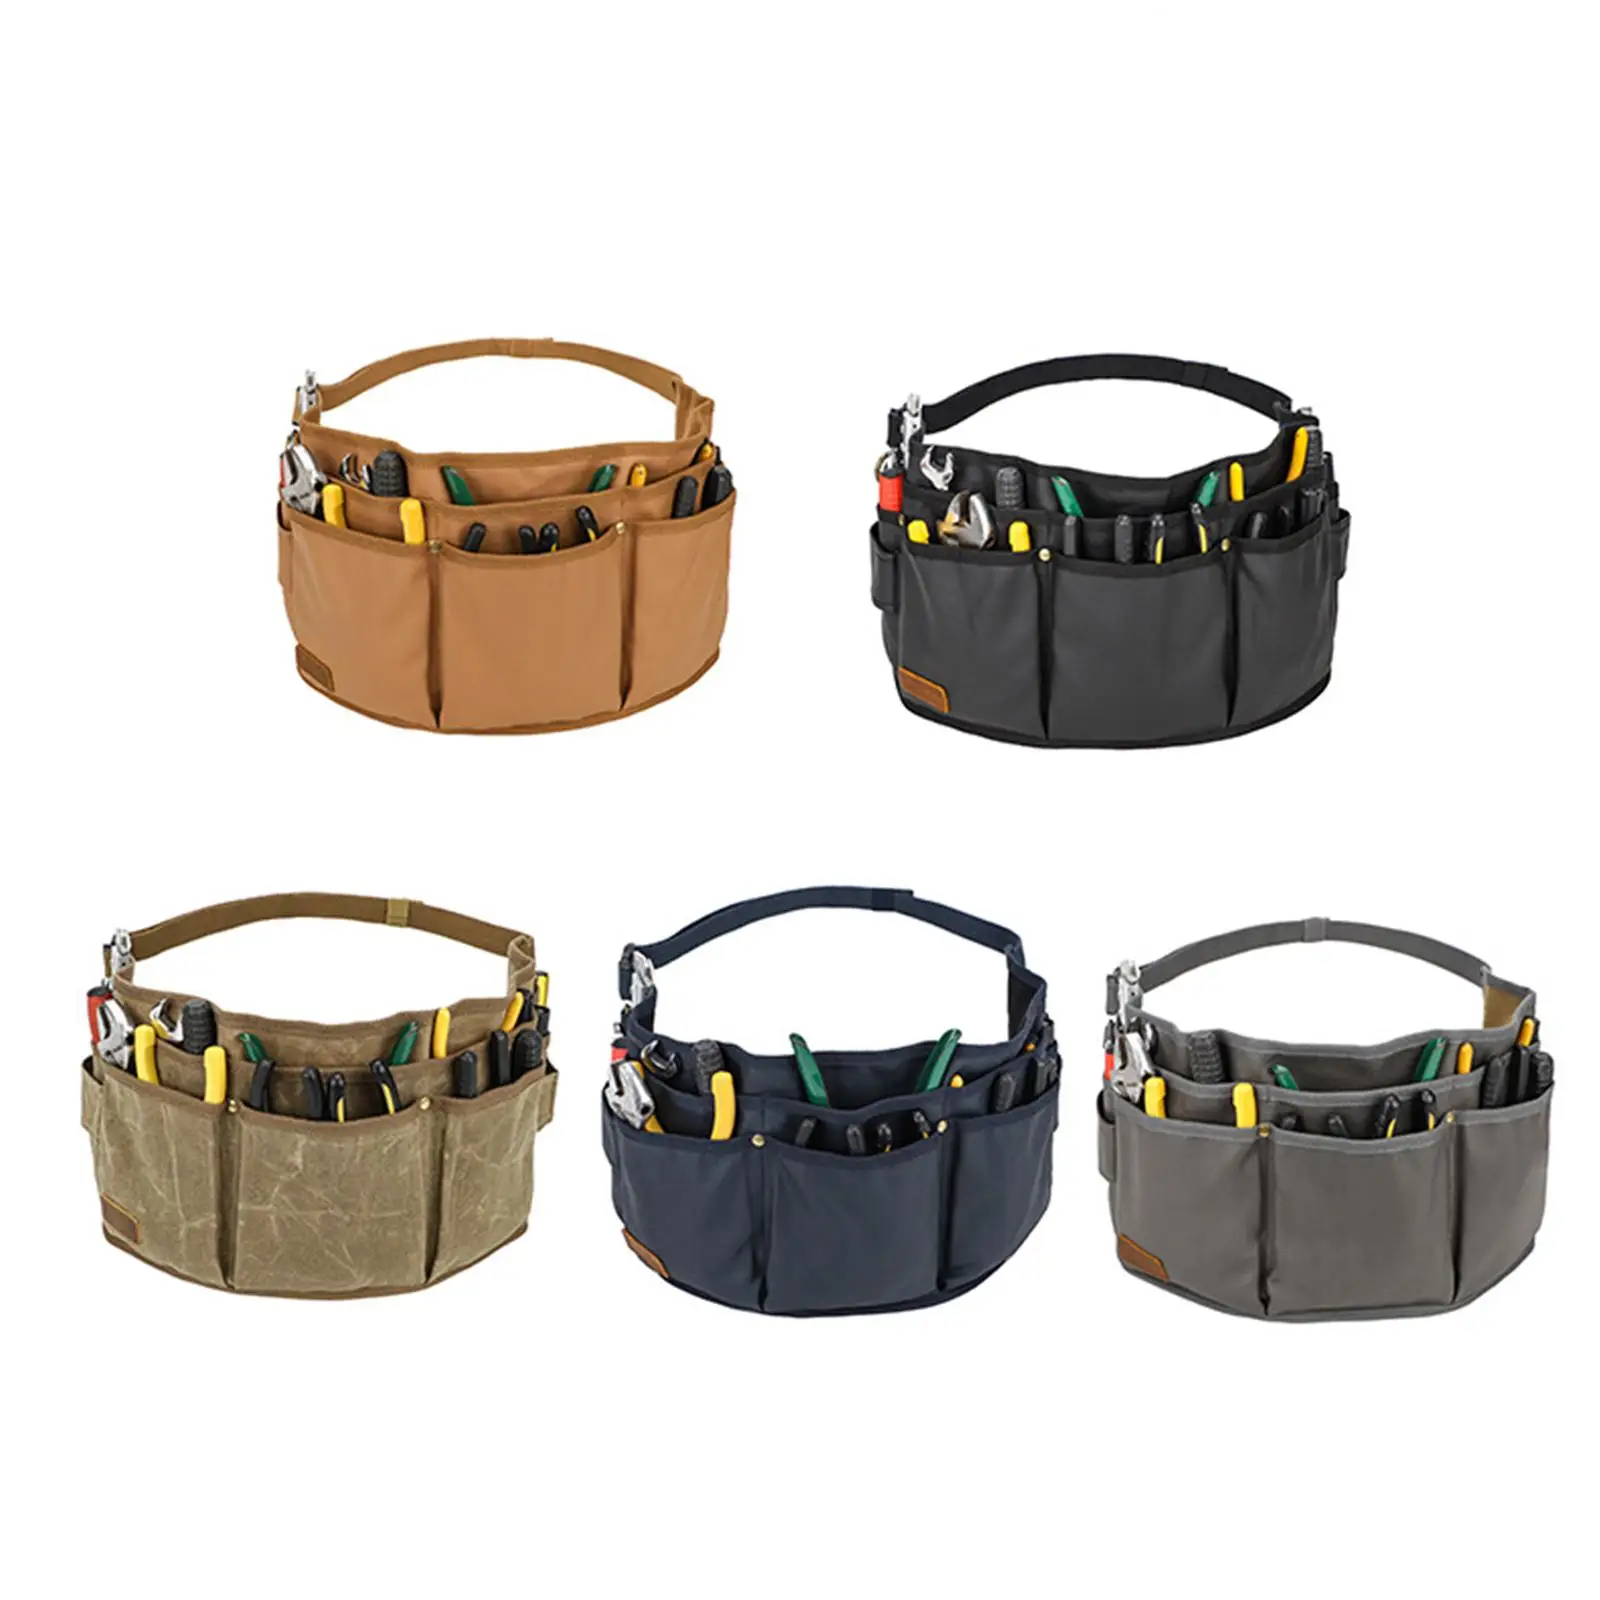 Waist Tools Bag Practical Portable for Electrician Multi Purpose Durable with Multiple Pockets Convenient Waist Storage Bag